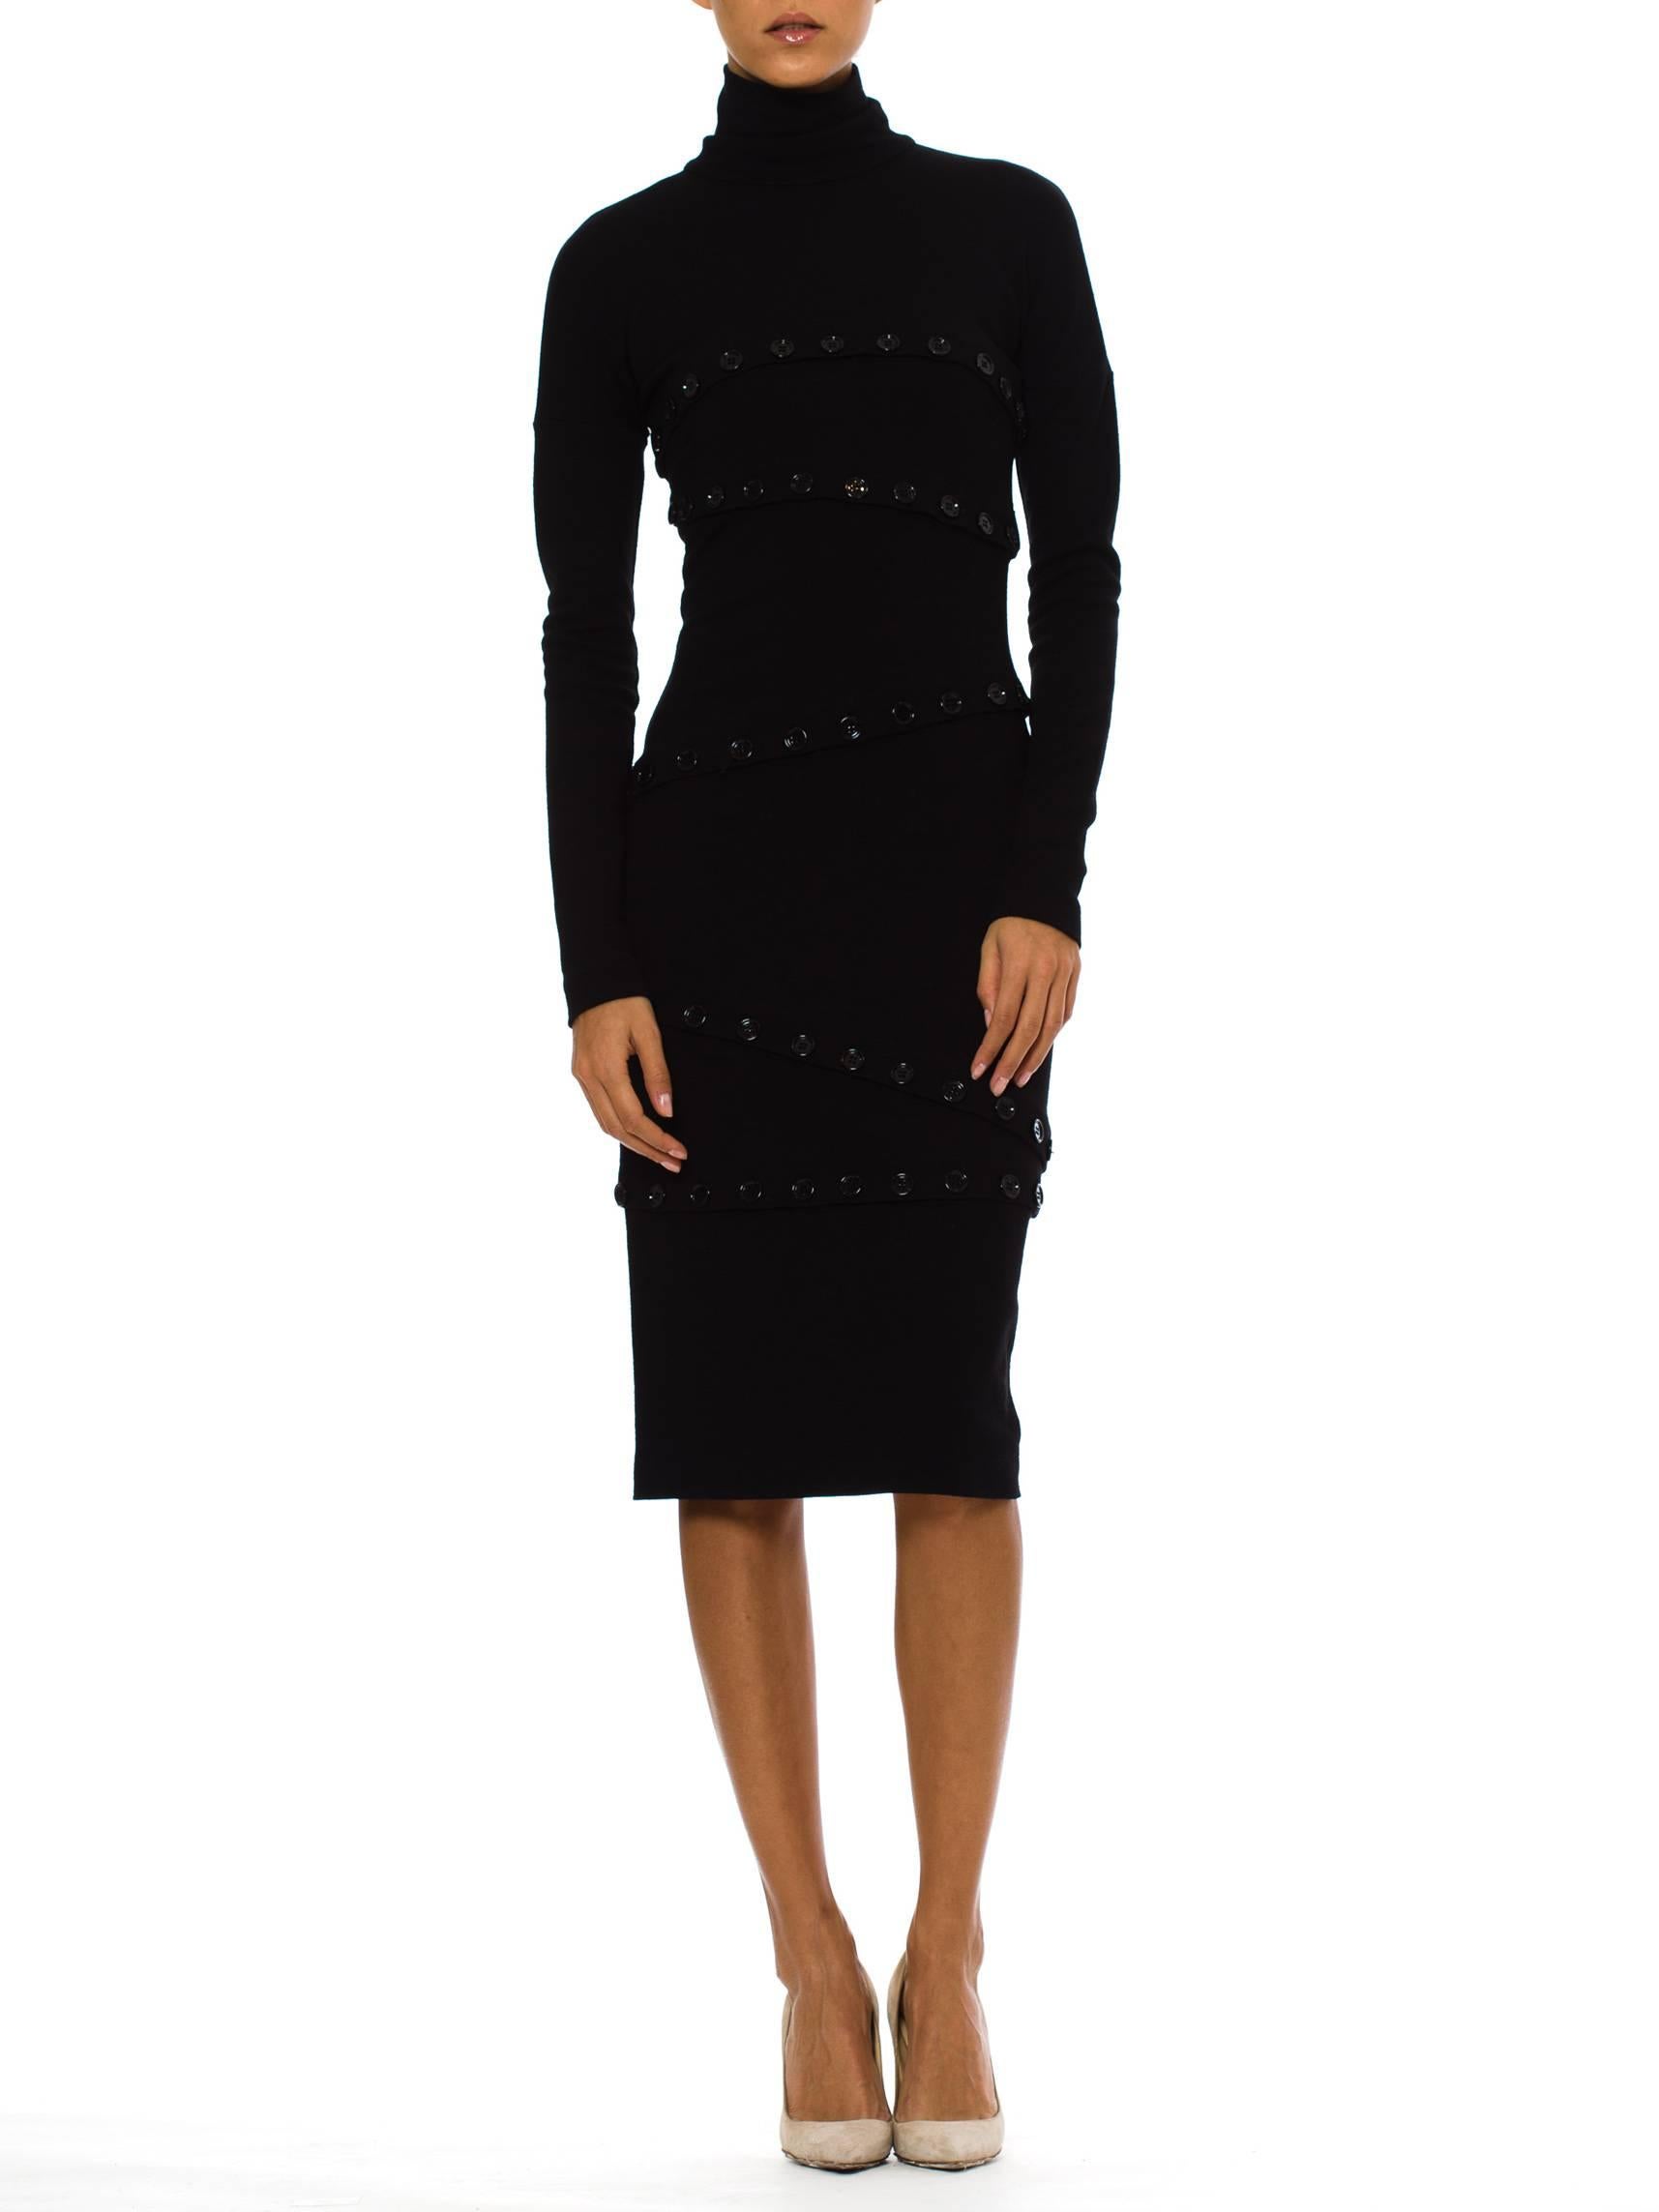 This is a striking turtle-necked dress from Dolce and Gabbana. The base of the dress is a simple and flattering affair: a body-conscious silhouette in a fine knit, with long sleeves, a single-layer turtleneck, and a knee-length hem. The